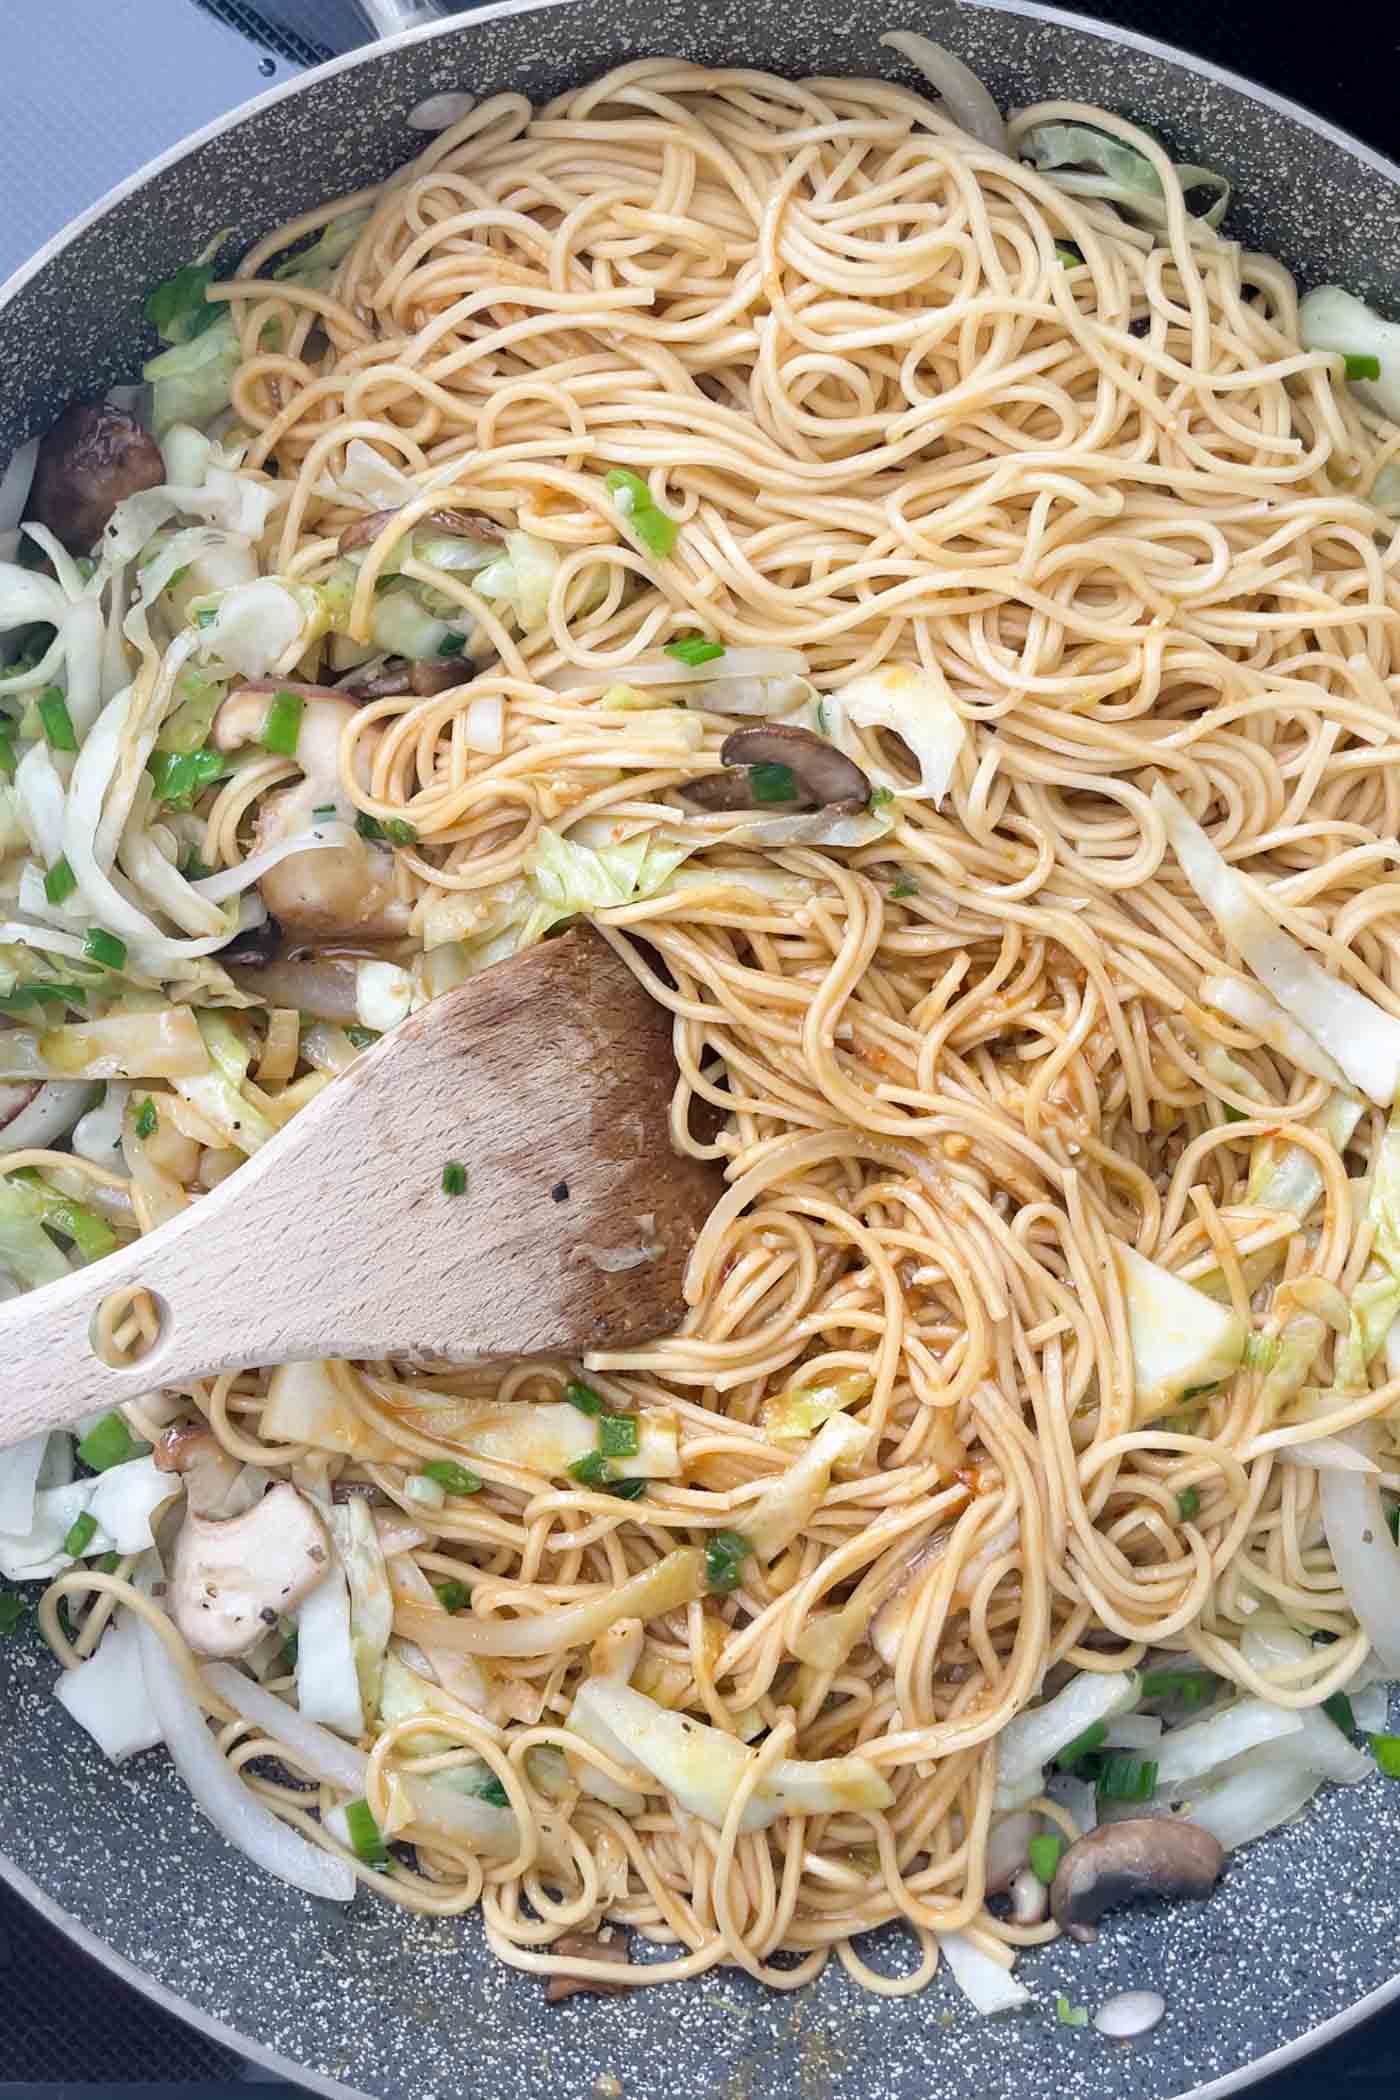 Noodles and sauce with cabbage and mushroom cooking in a large skillet with a wooden spoon.